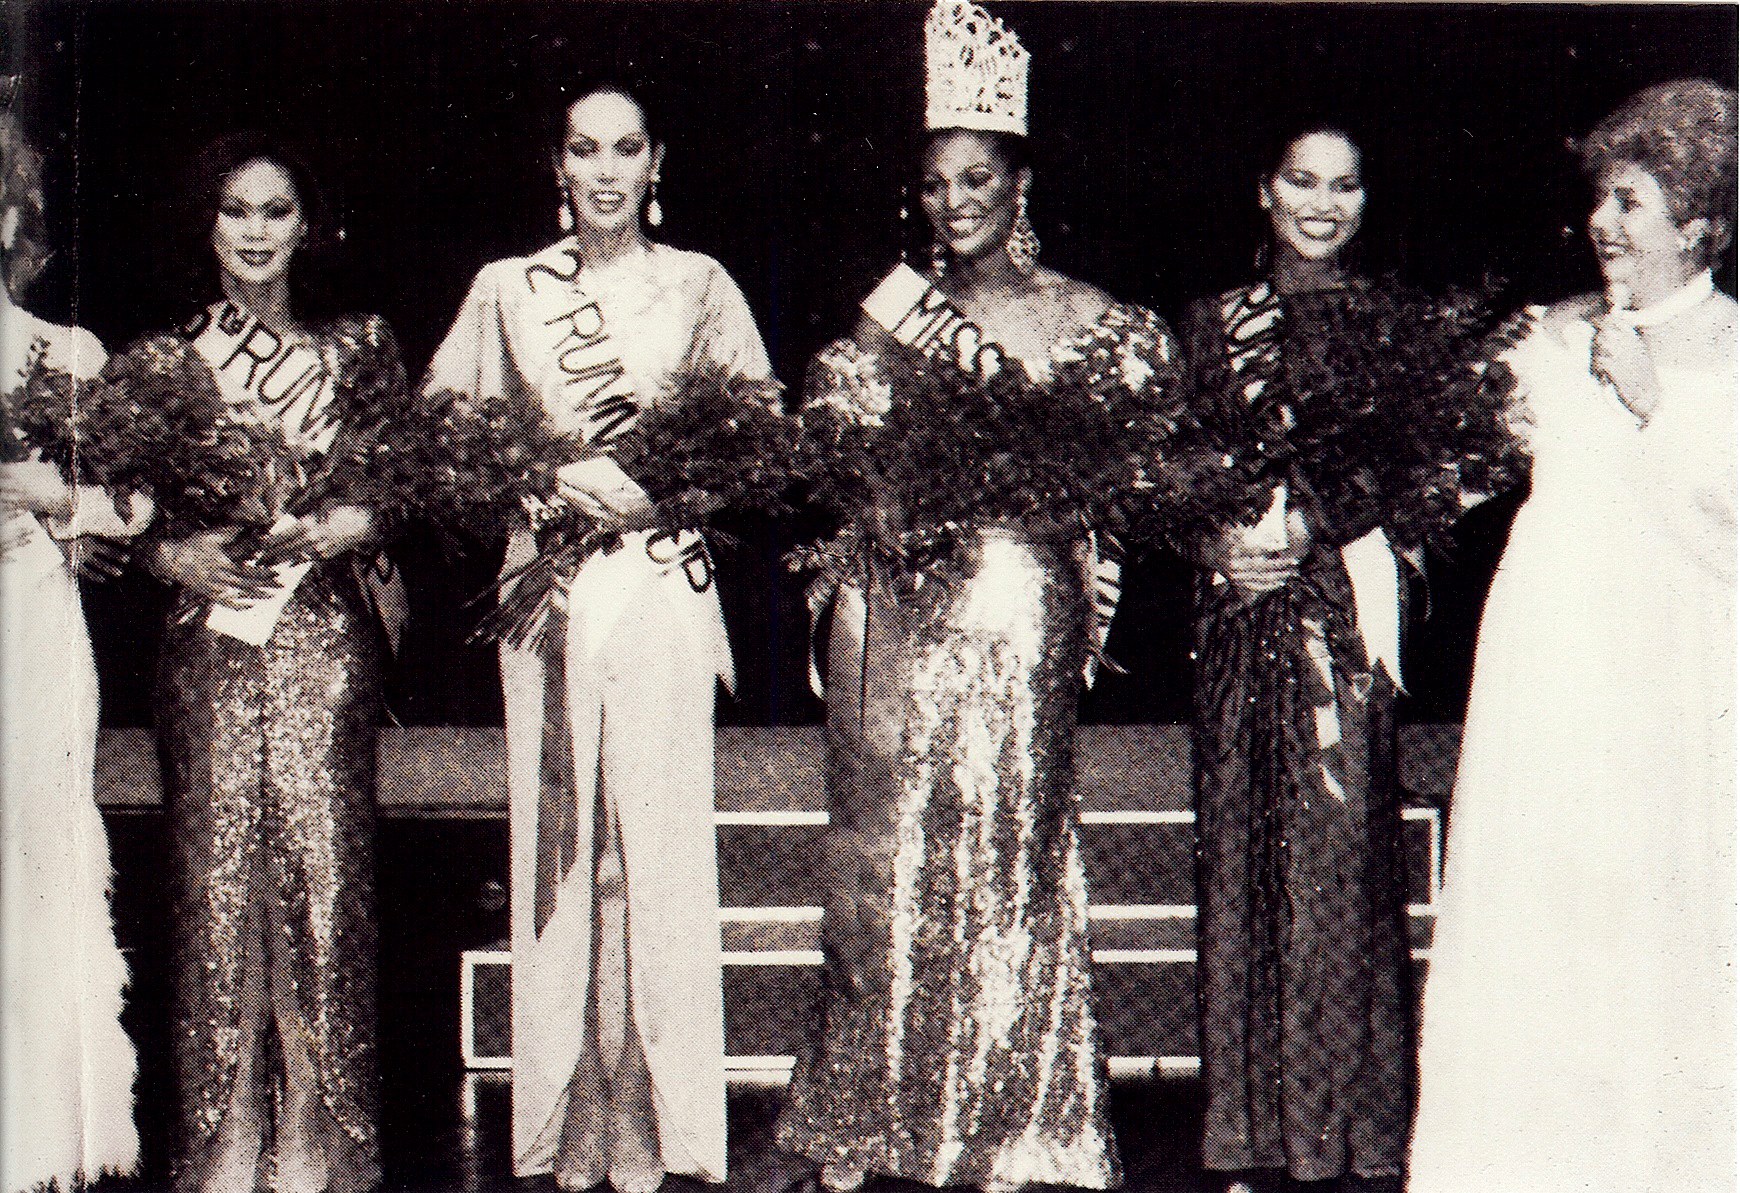 Top Five at Miss Continental 1982 when Tiffany Andretta Arieagus won. Left to Right: Shawna Reese Steel (4th Alternate and barely in photo) , Cherine Alexander (3rd Alternate), Andrea Nicole (2nd Alternate), Tiffany Arieagus (Winner), Dina Jacobs (1st Alternate) and Miss Continental Pageant owner Jim Flint (AKA Felicia).